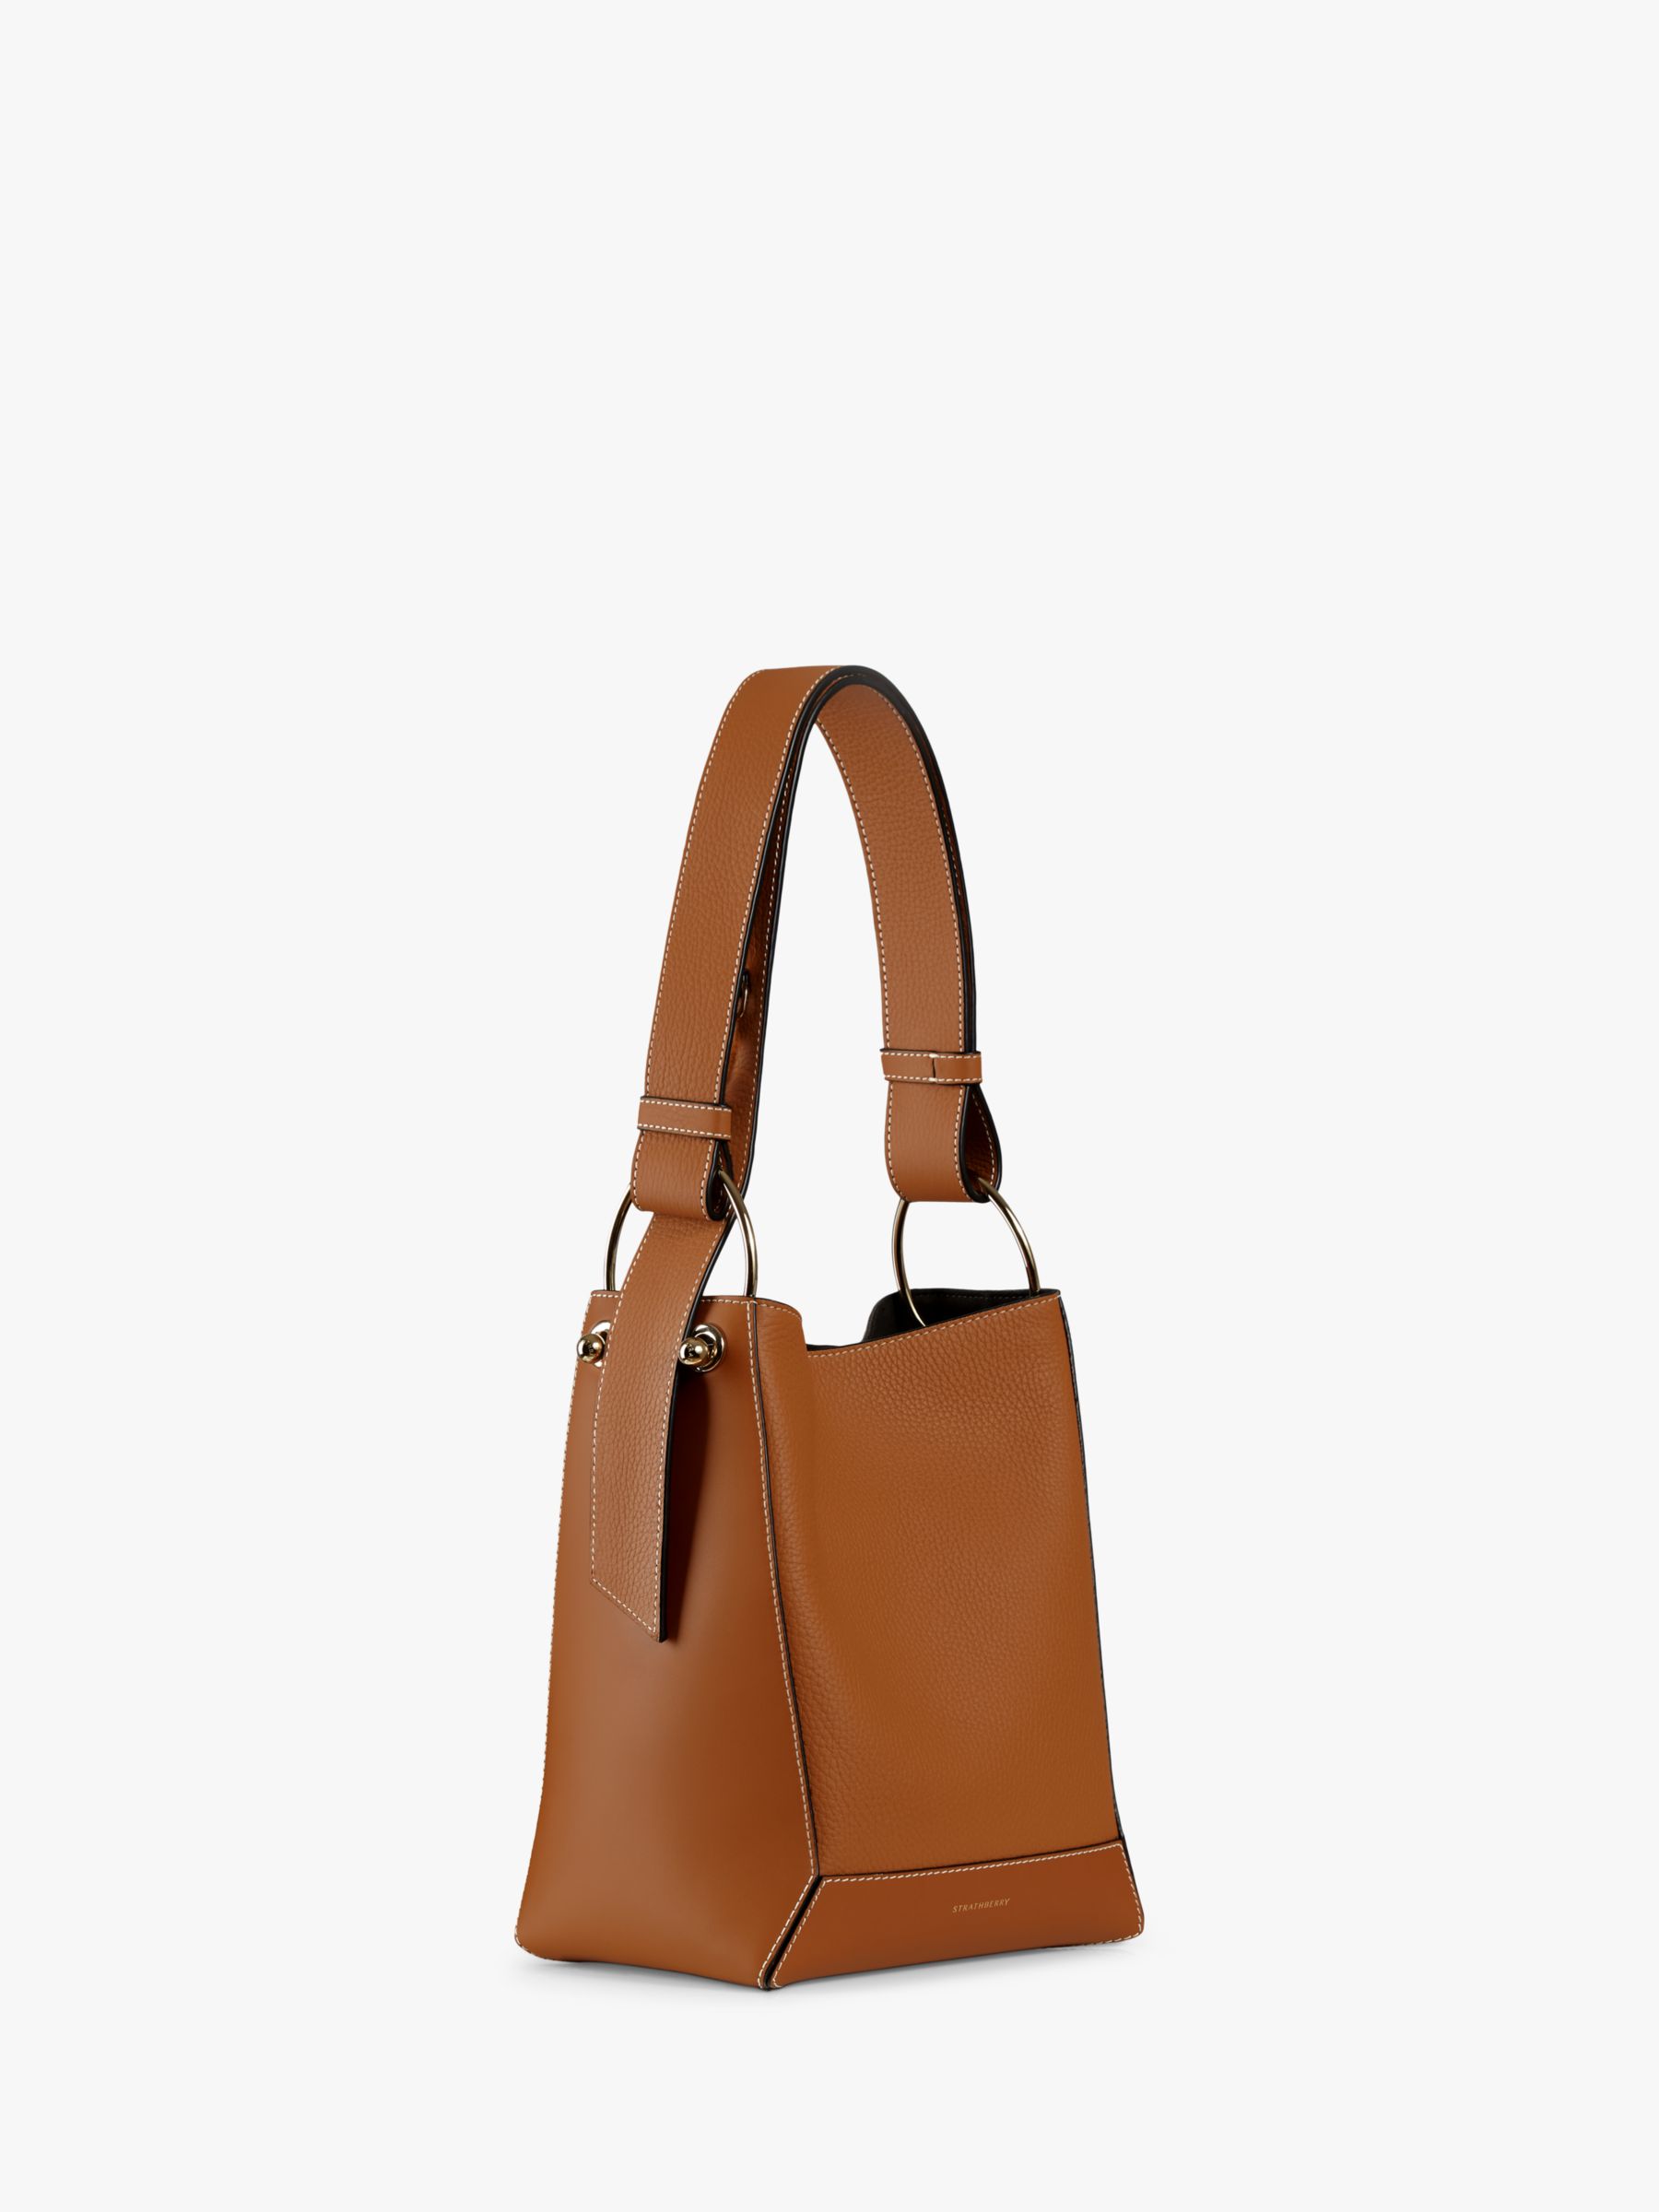 Strathberry Lana Osette Leather Bucket Bag, Tan at John Lewis & Partners